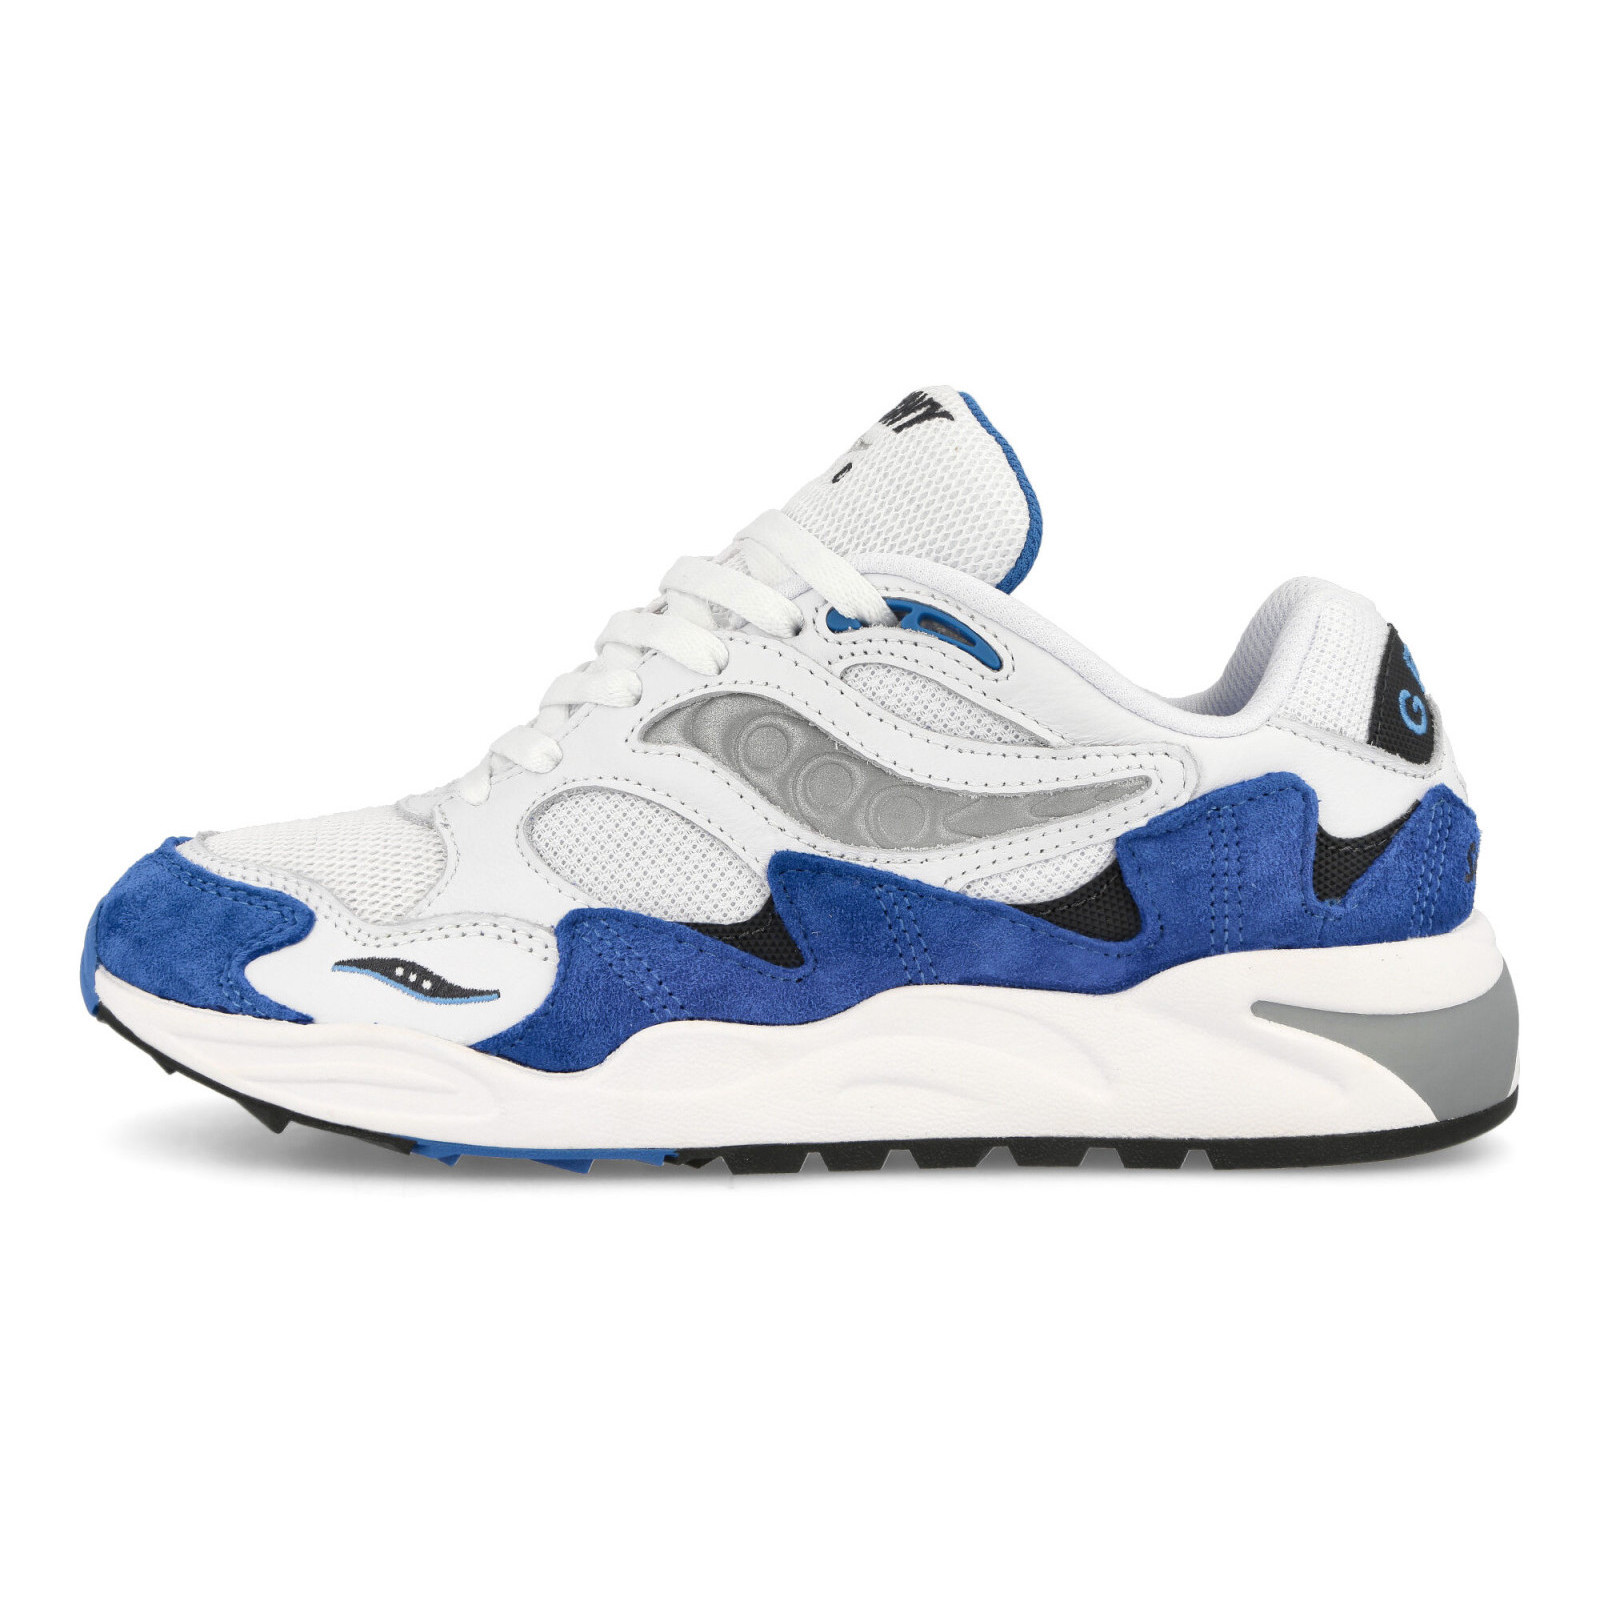 Saucony Grid Shadow 2
White / Blue